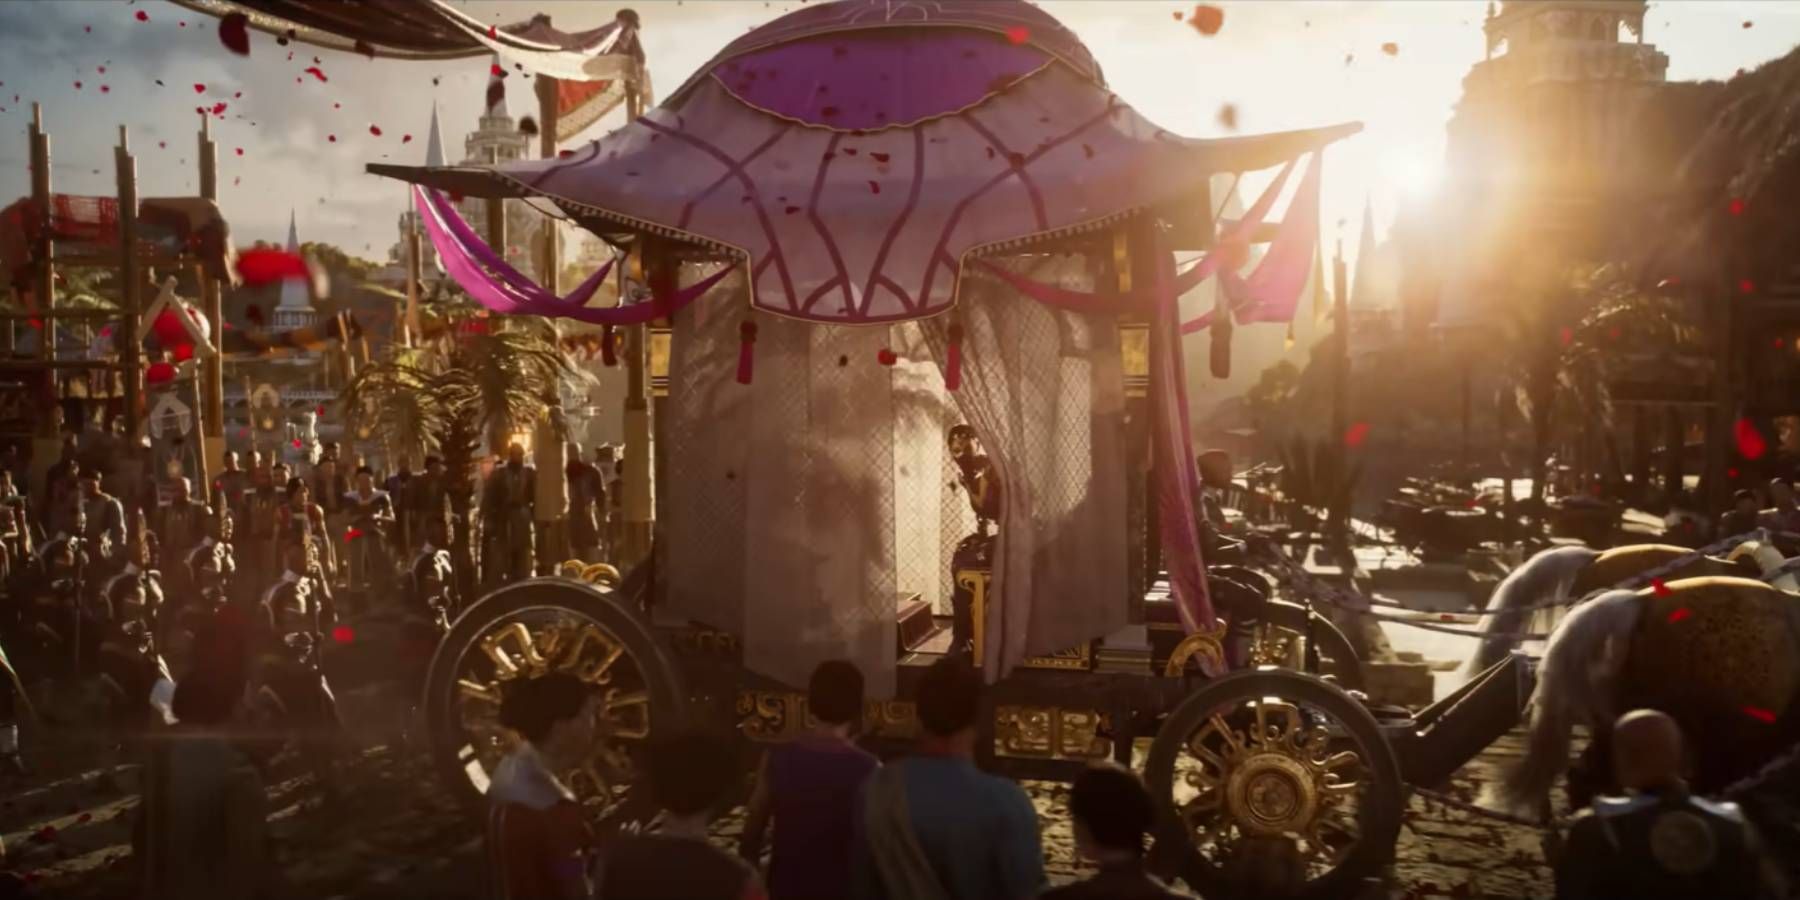 Kitana and Mileena riding in a carriage in the Mortal Kombat 1 reveal trailer